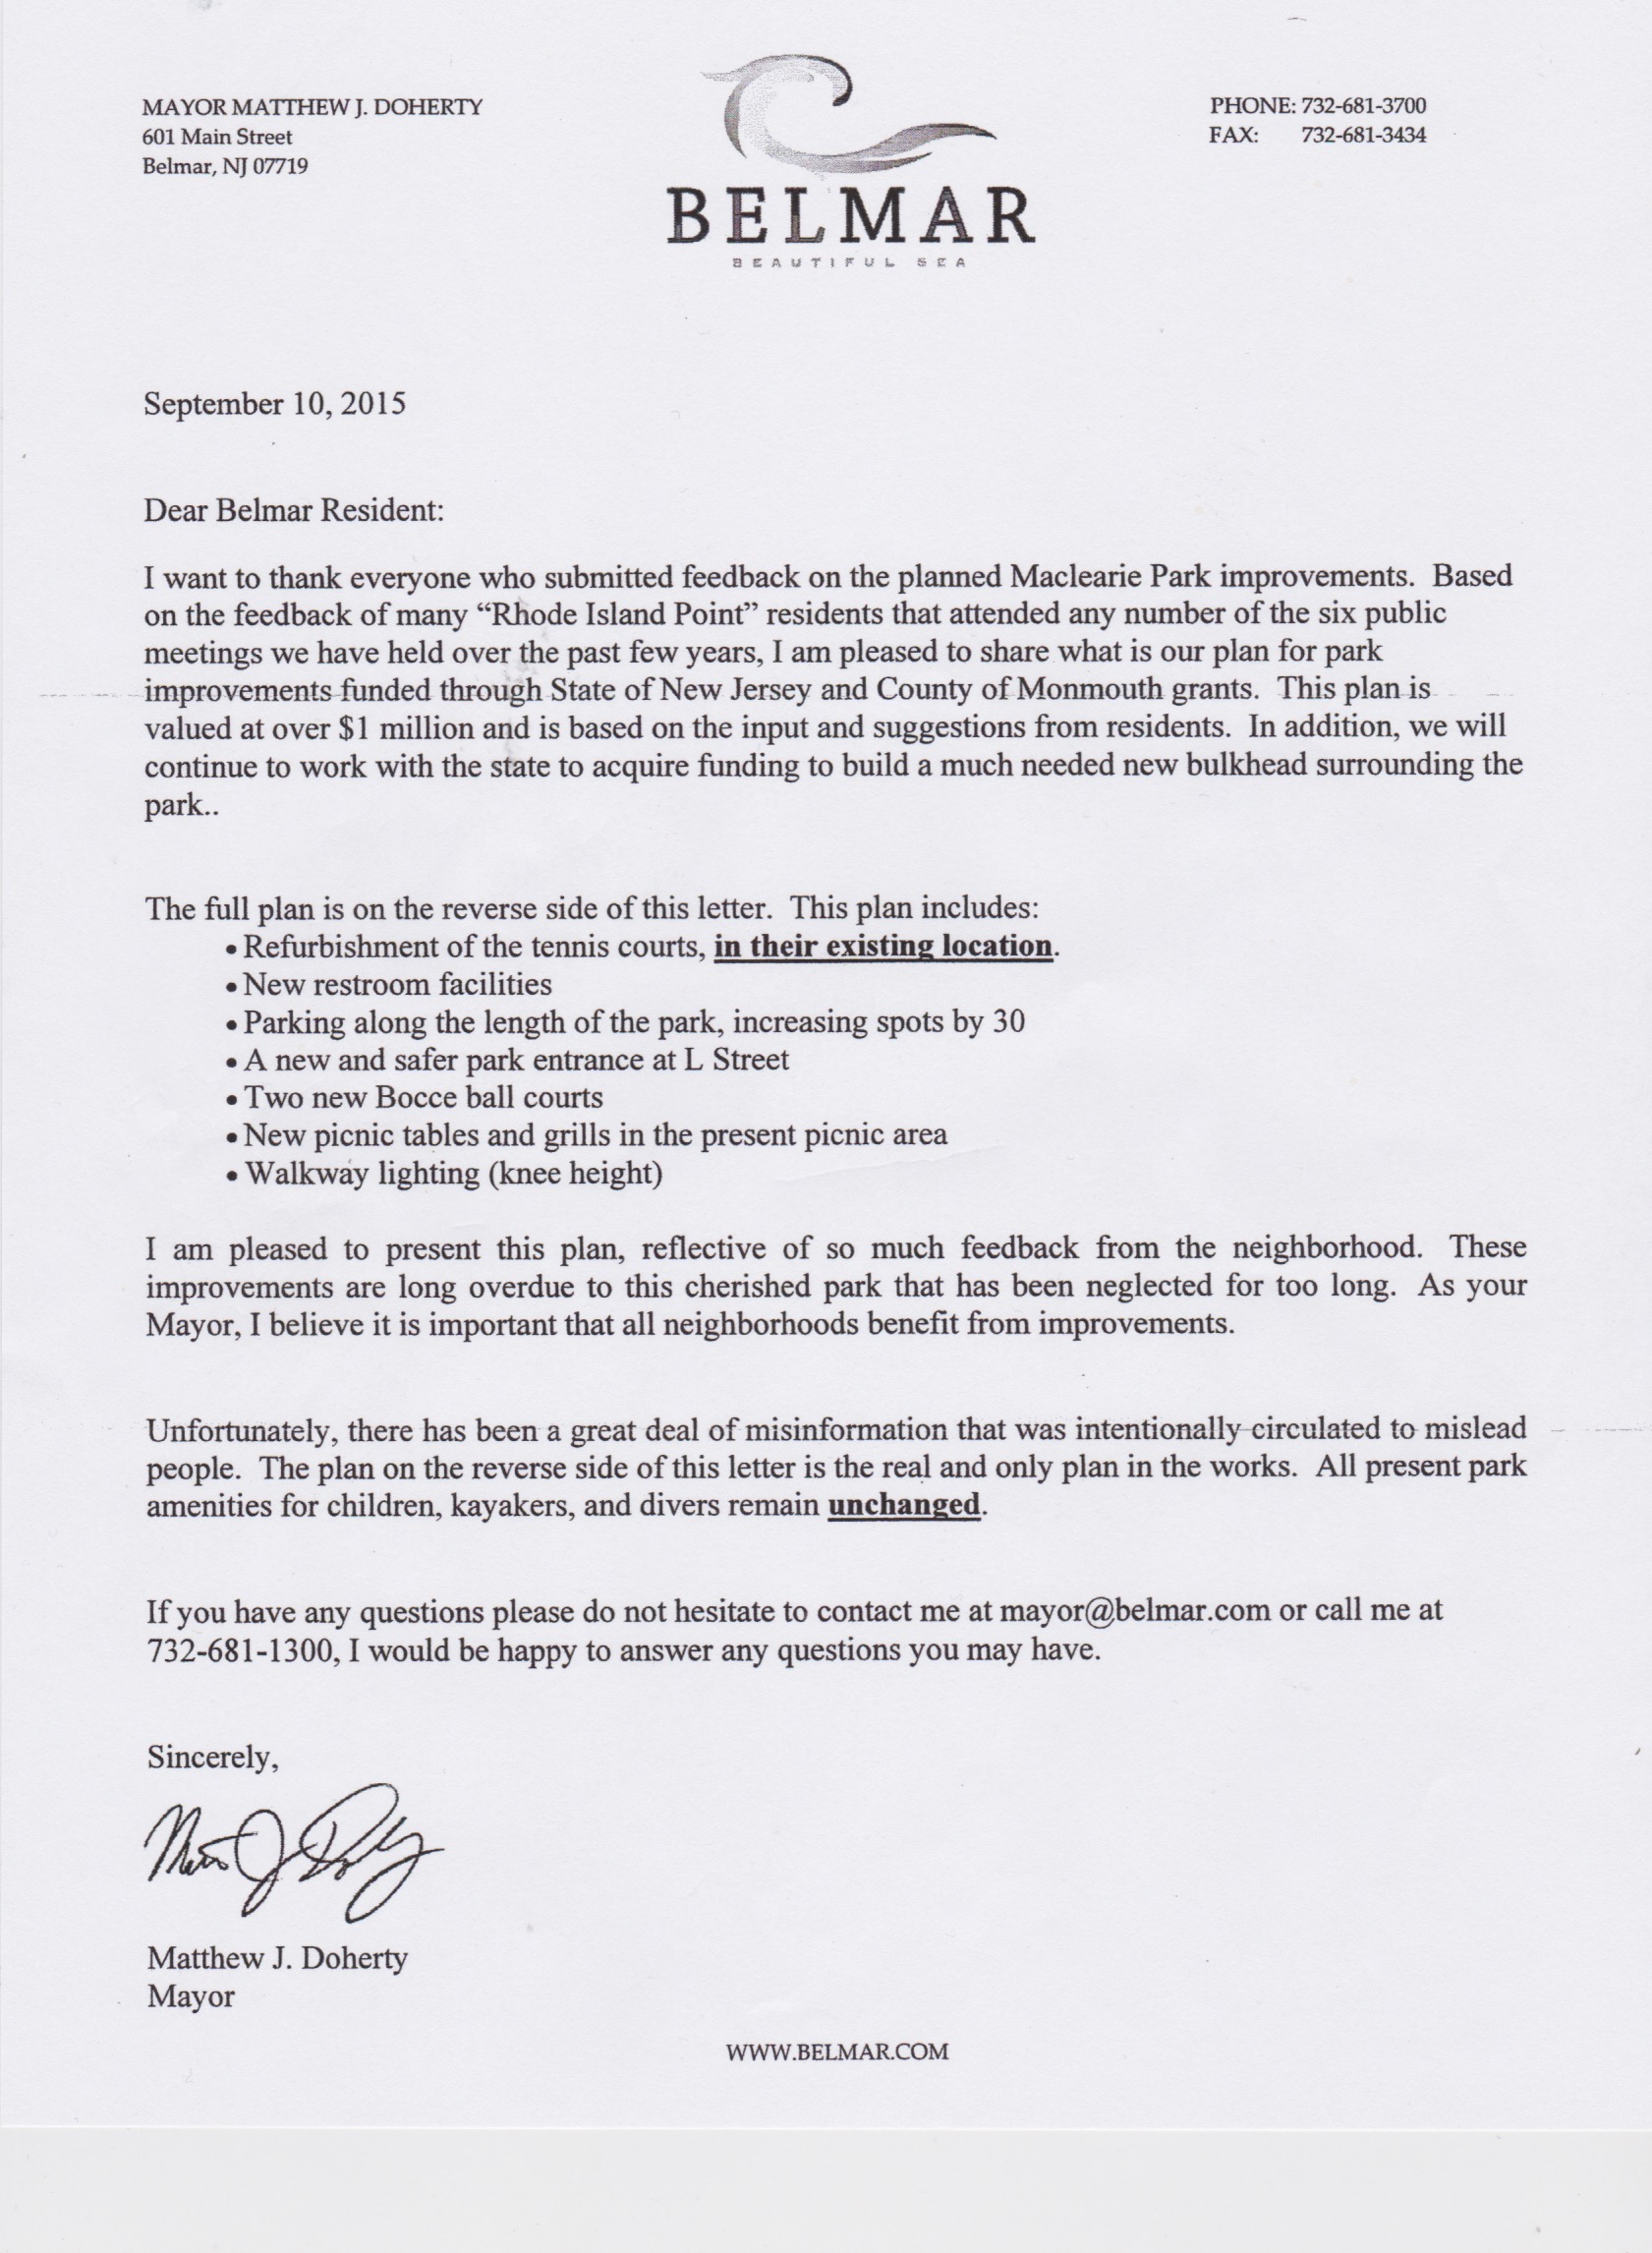 Doherty letter